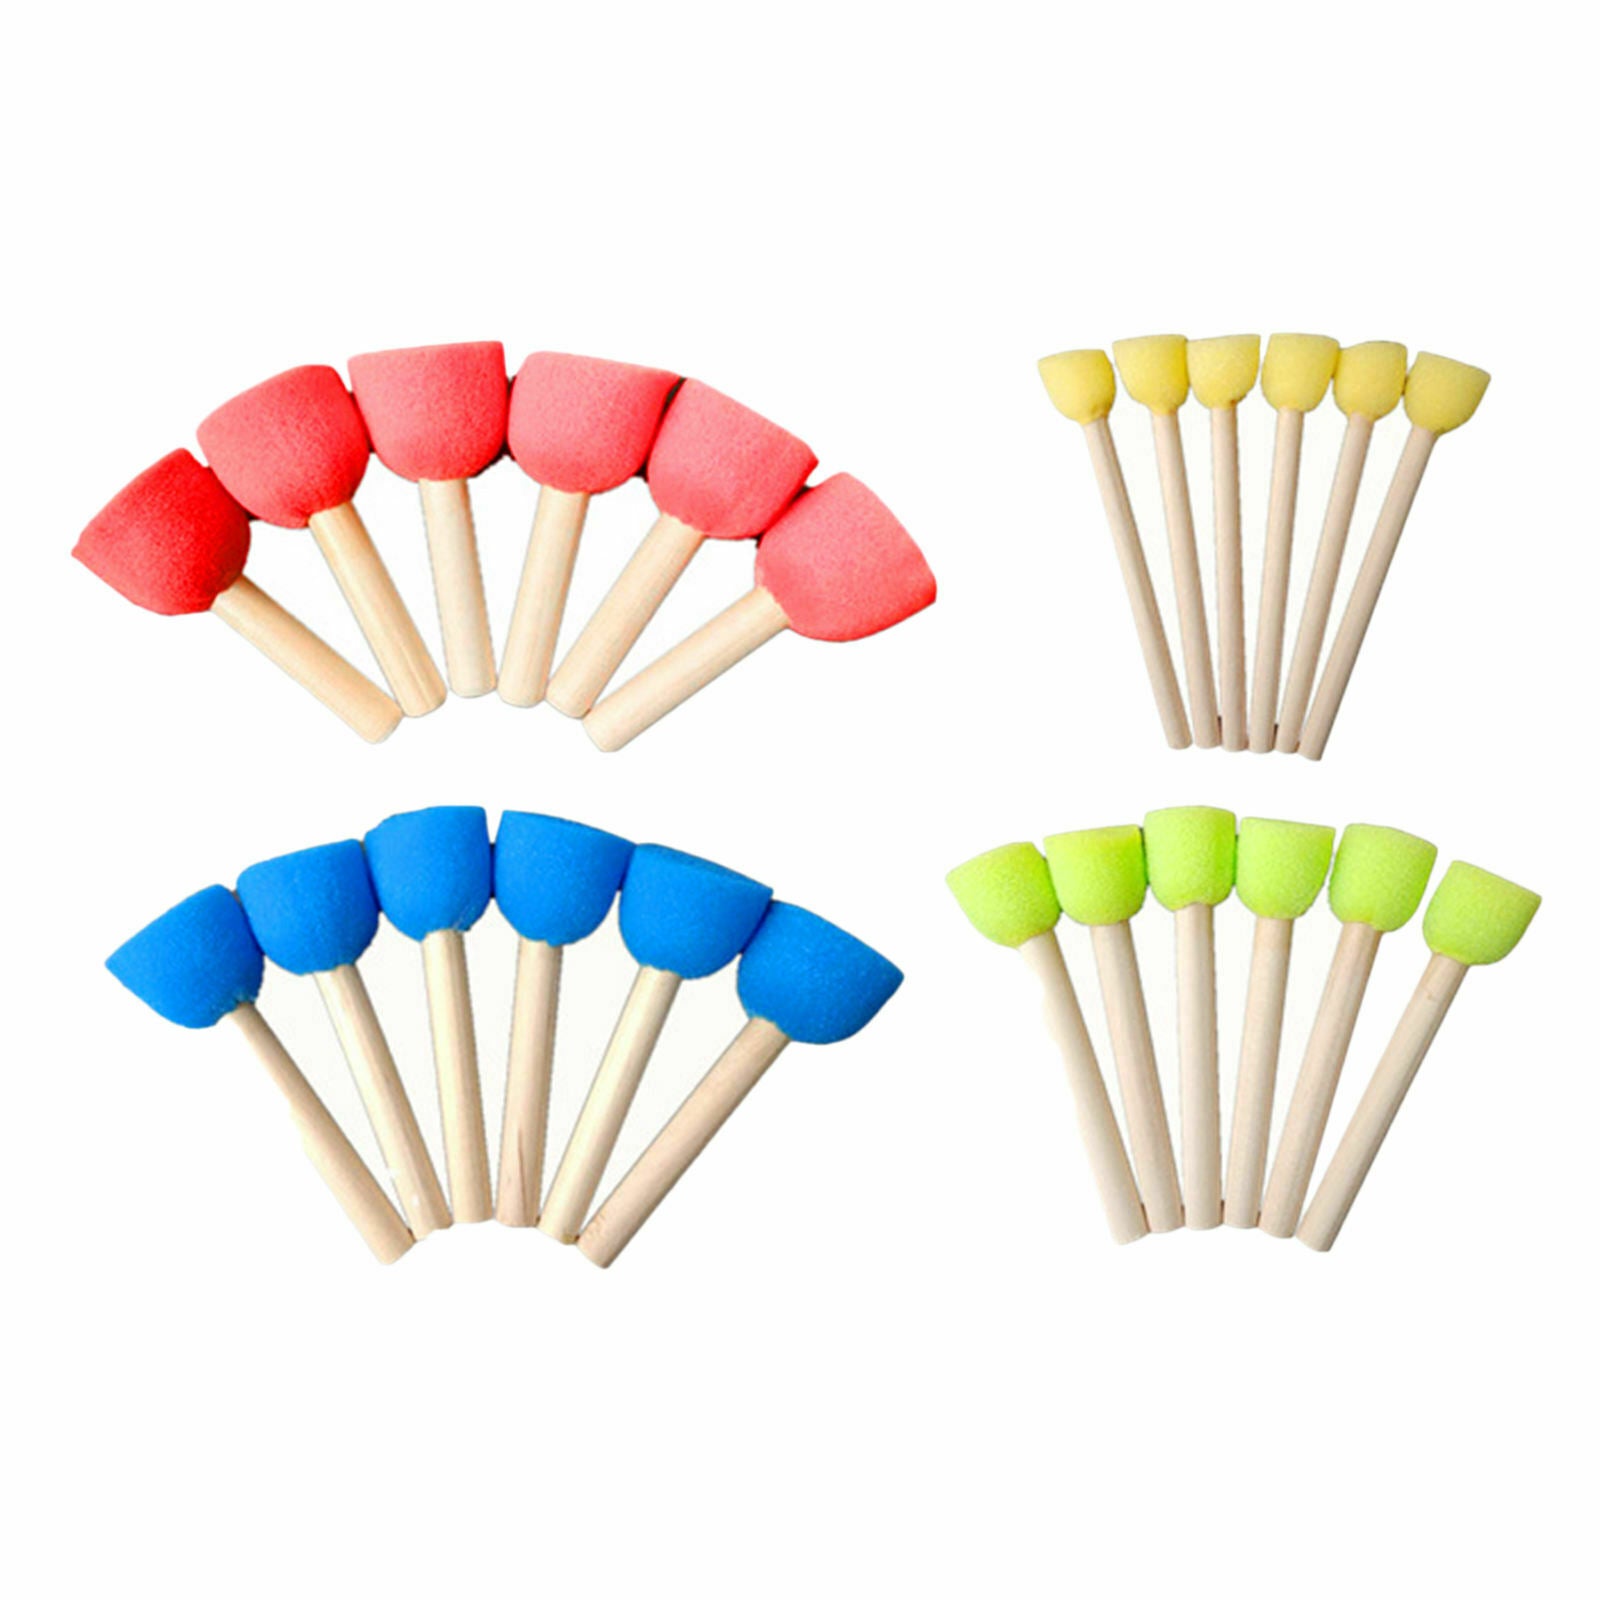 24 Pieces Round Sponges Brush Set Painting Stippler Assorted Size for Kids